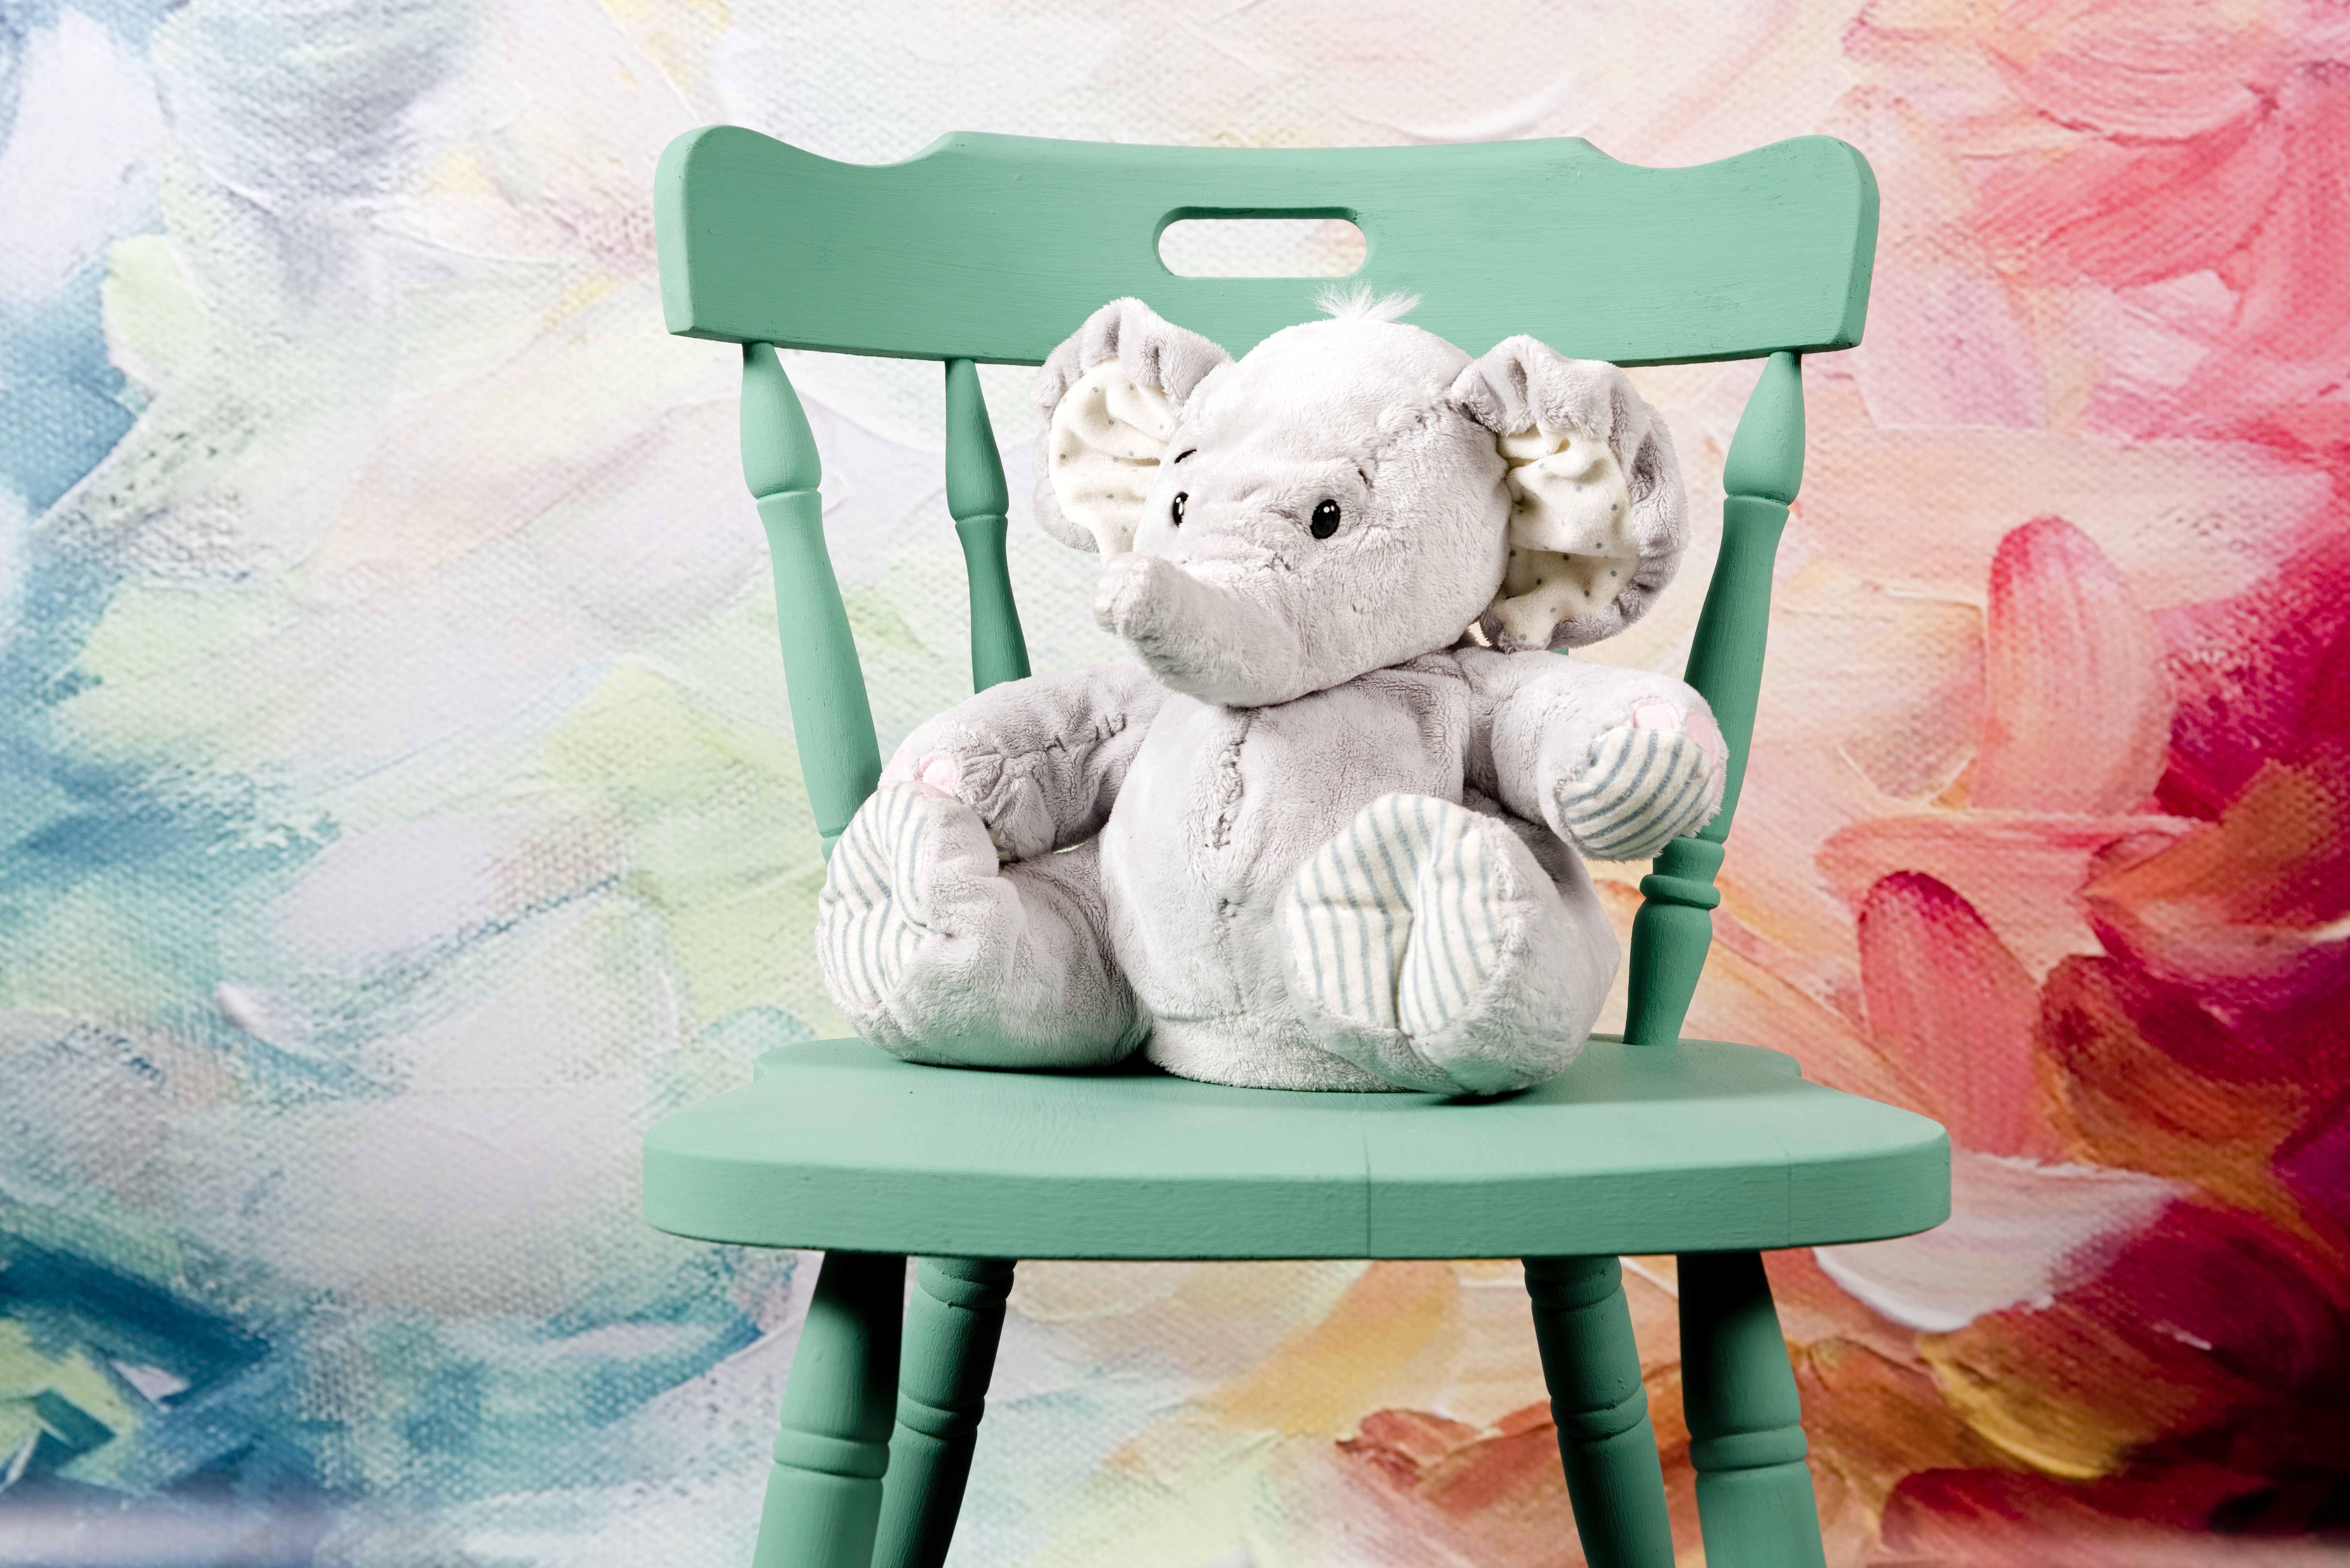 grey elephant plush toy and green windsor chair